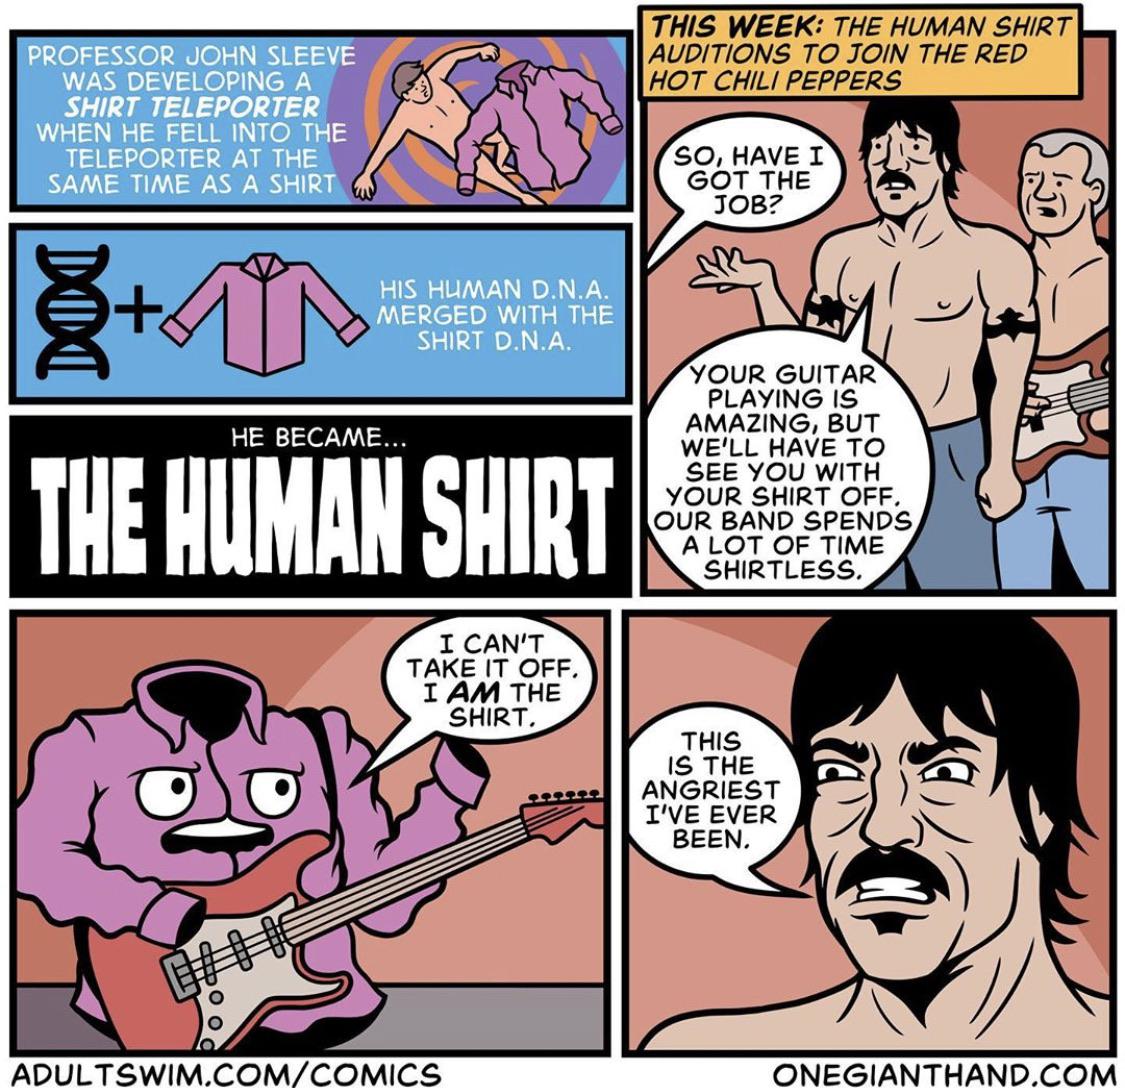 The human shirt (by onegianthand), The Human Shirt Comics The human shirt (by onegianthand), The Human Shirt text: WAS DEVELOPING A SHIRT TELEPORTER WHEN HE FELL INTO THE TELEPORTER AT THE 0 SHIR AME IME HIS HUMAN D.N.A. MERGED WITH TH SHIRT D.N.A. HE BECAME... TIE IUMAN 1 CAN'T TAKE IT OFF. 1 AM THE SHIRT. o o ADULTSWIM.COM/COMICS THIS WEEK: THE HUMAN SHIRT AUDITIONS TO JOIN THE RED HOT CHILI PEPPERS SO, HAVE 1 GOT THE YOUR GUITAR PLAYING IS AMAZING, BUT WE'LL HAVE TO SEE you WITH YOUR SHIRT OFF. OUR BAND SPENDS A LOT OF TIME SHIRTLESS. THIS IS THE ANGRIEST I'VE EVER ONE-GIANTHAND.COM 